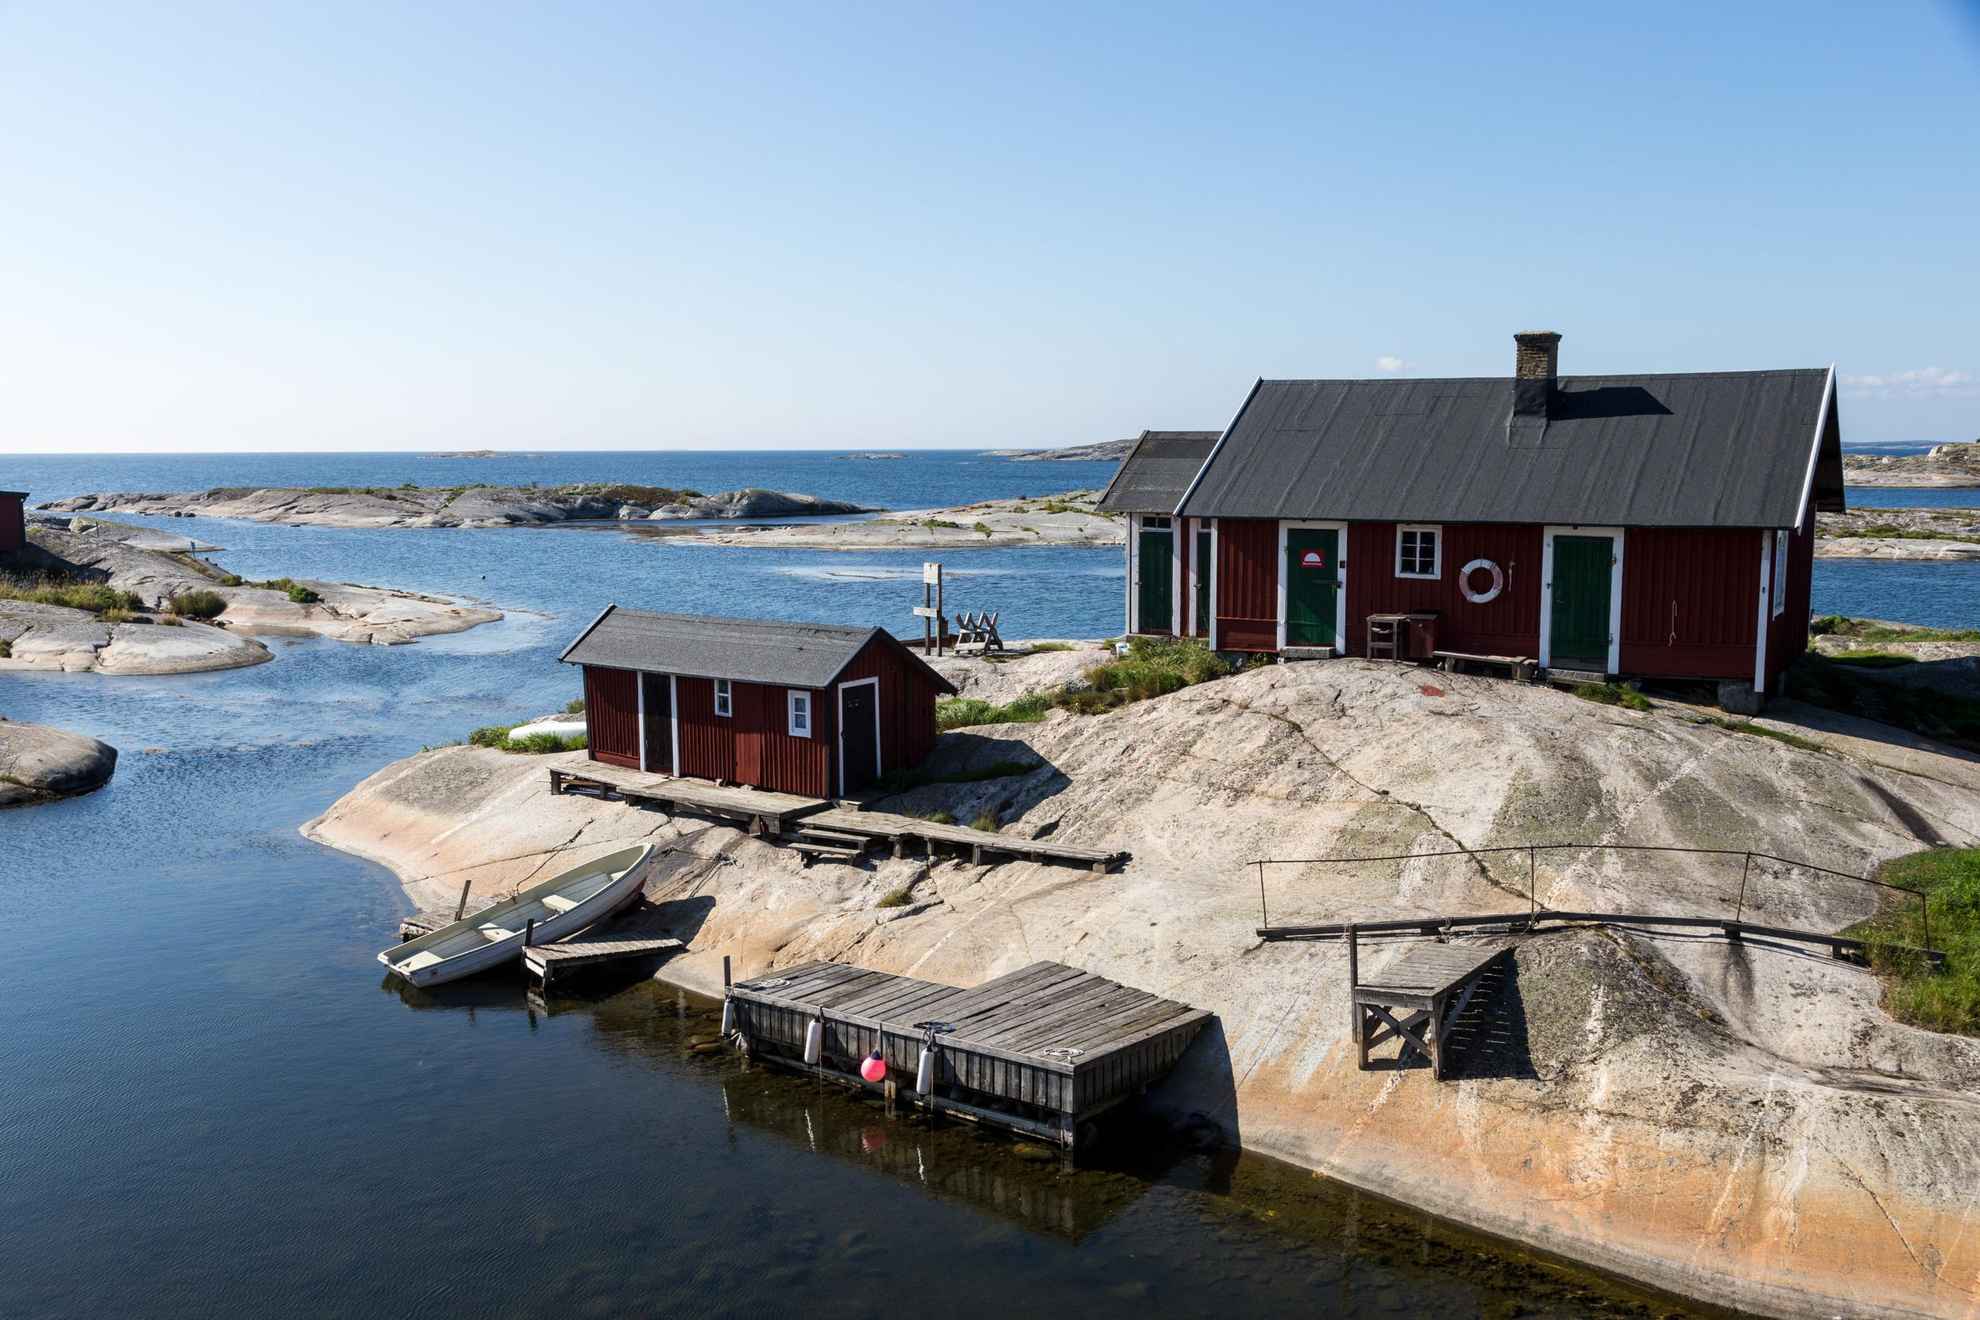 A house and a boathouse with a wooden pier sit on a cliff in the Stockholm archipelago. An empty boat sits on the ocean, halfway up on the cliff.